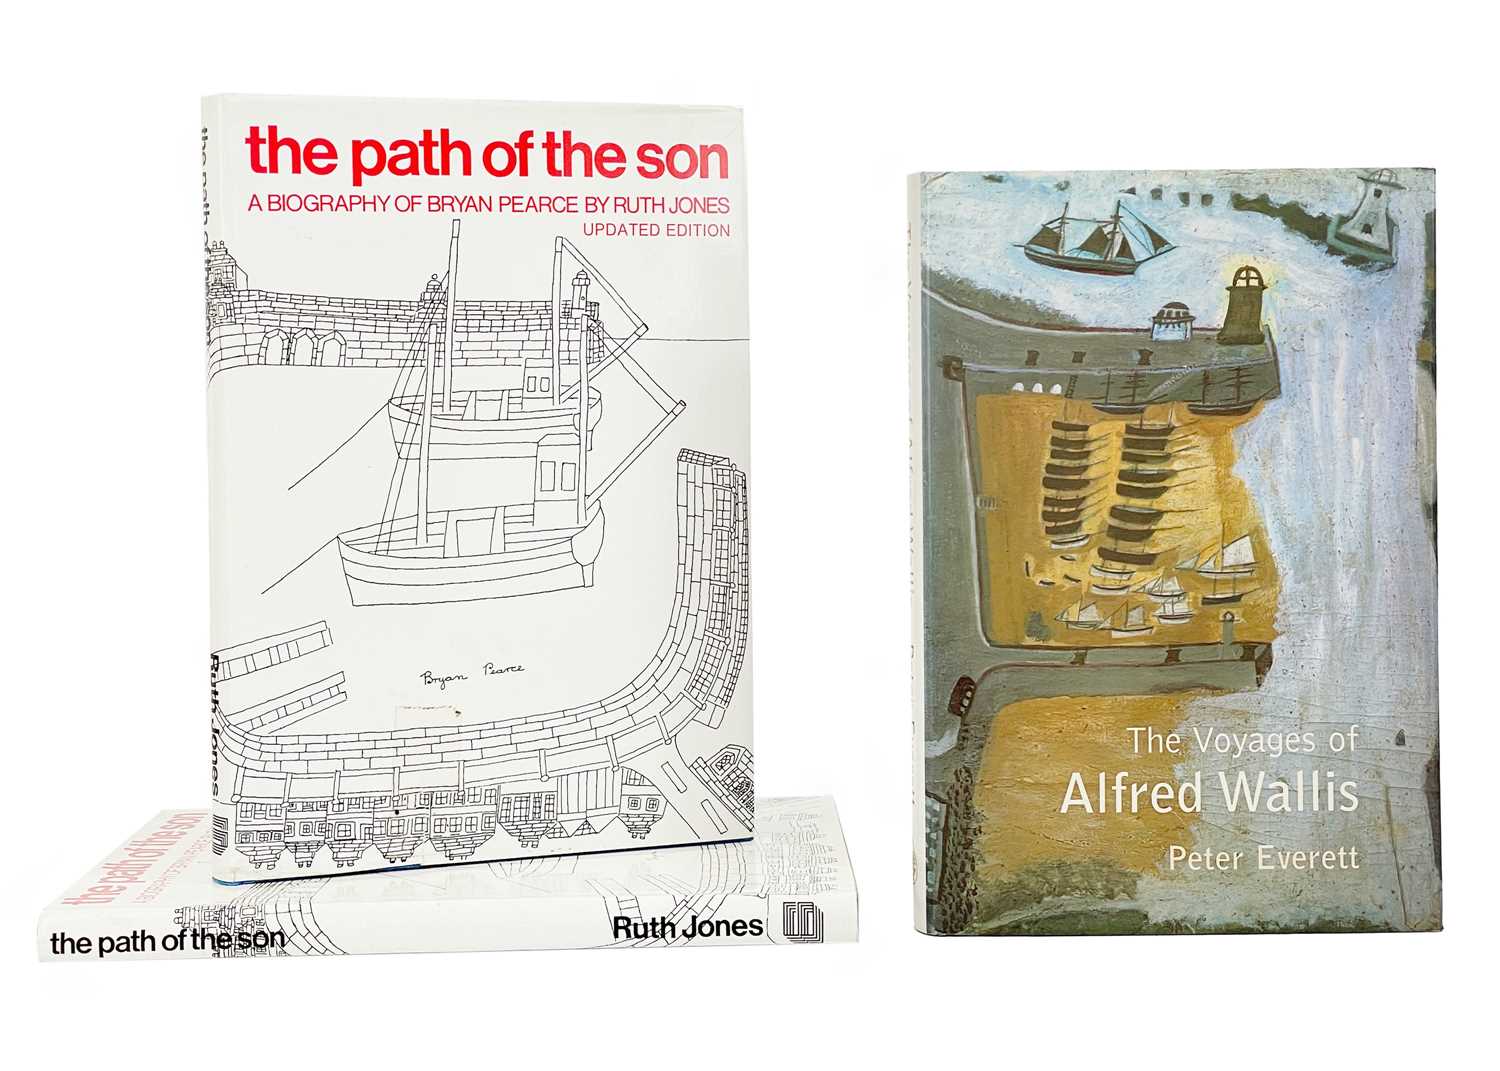 Bryan PEARCE (signed) Ruth Jones 'The Path Of The Son'